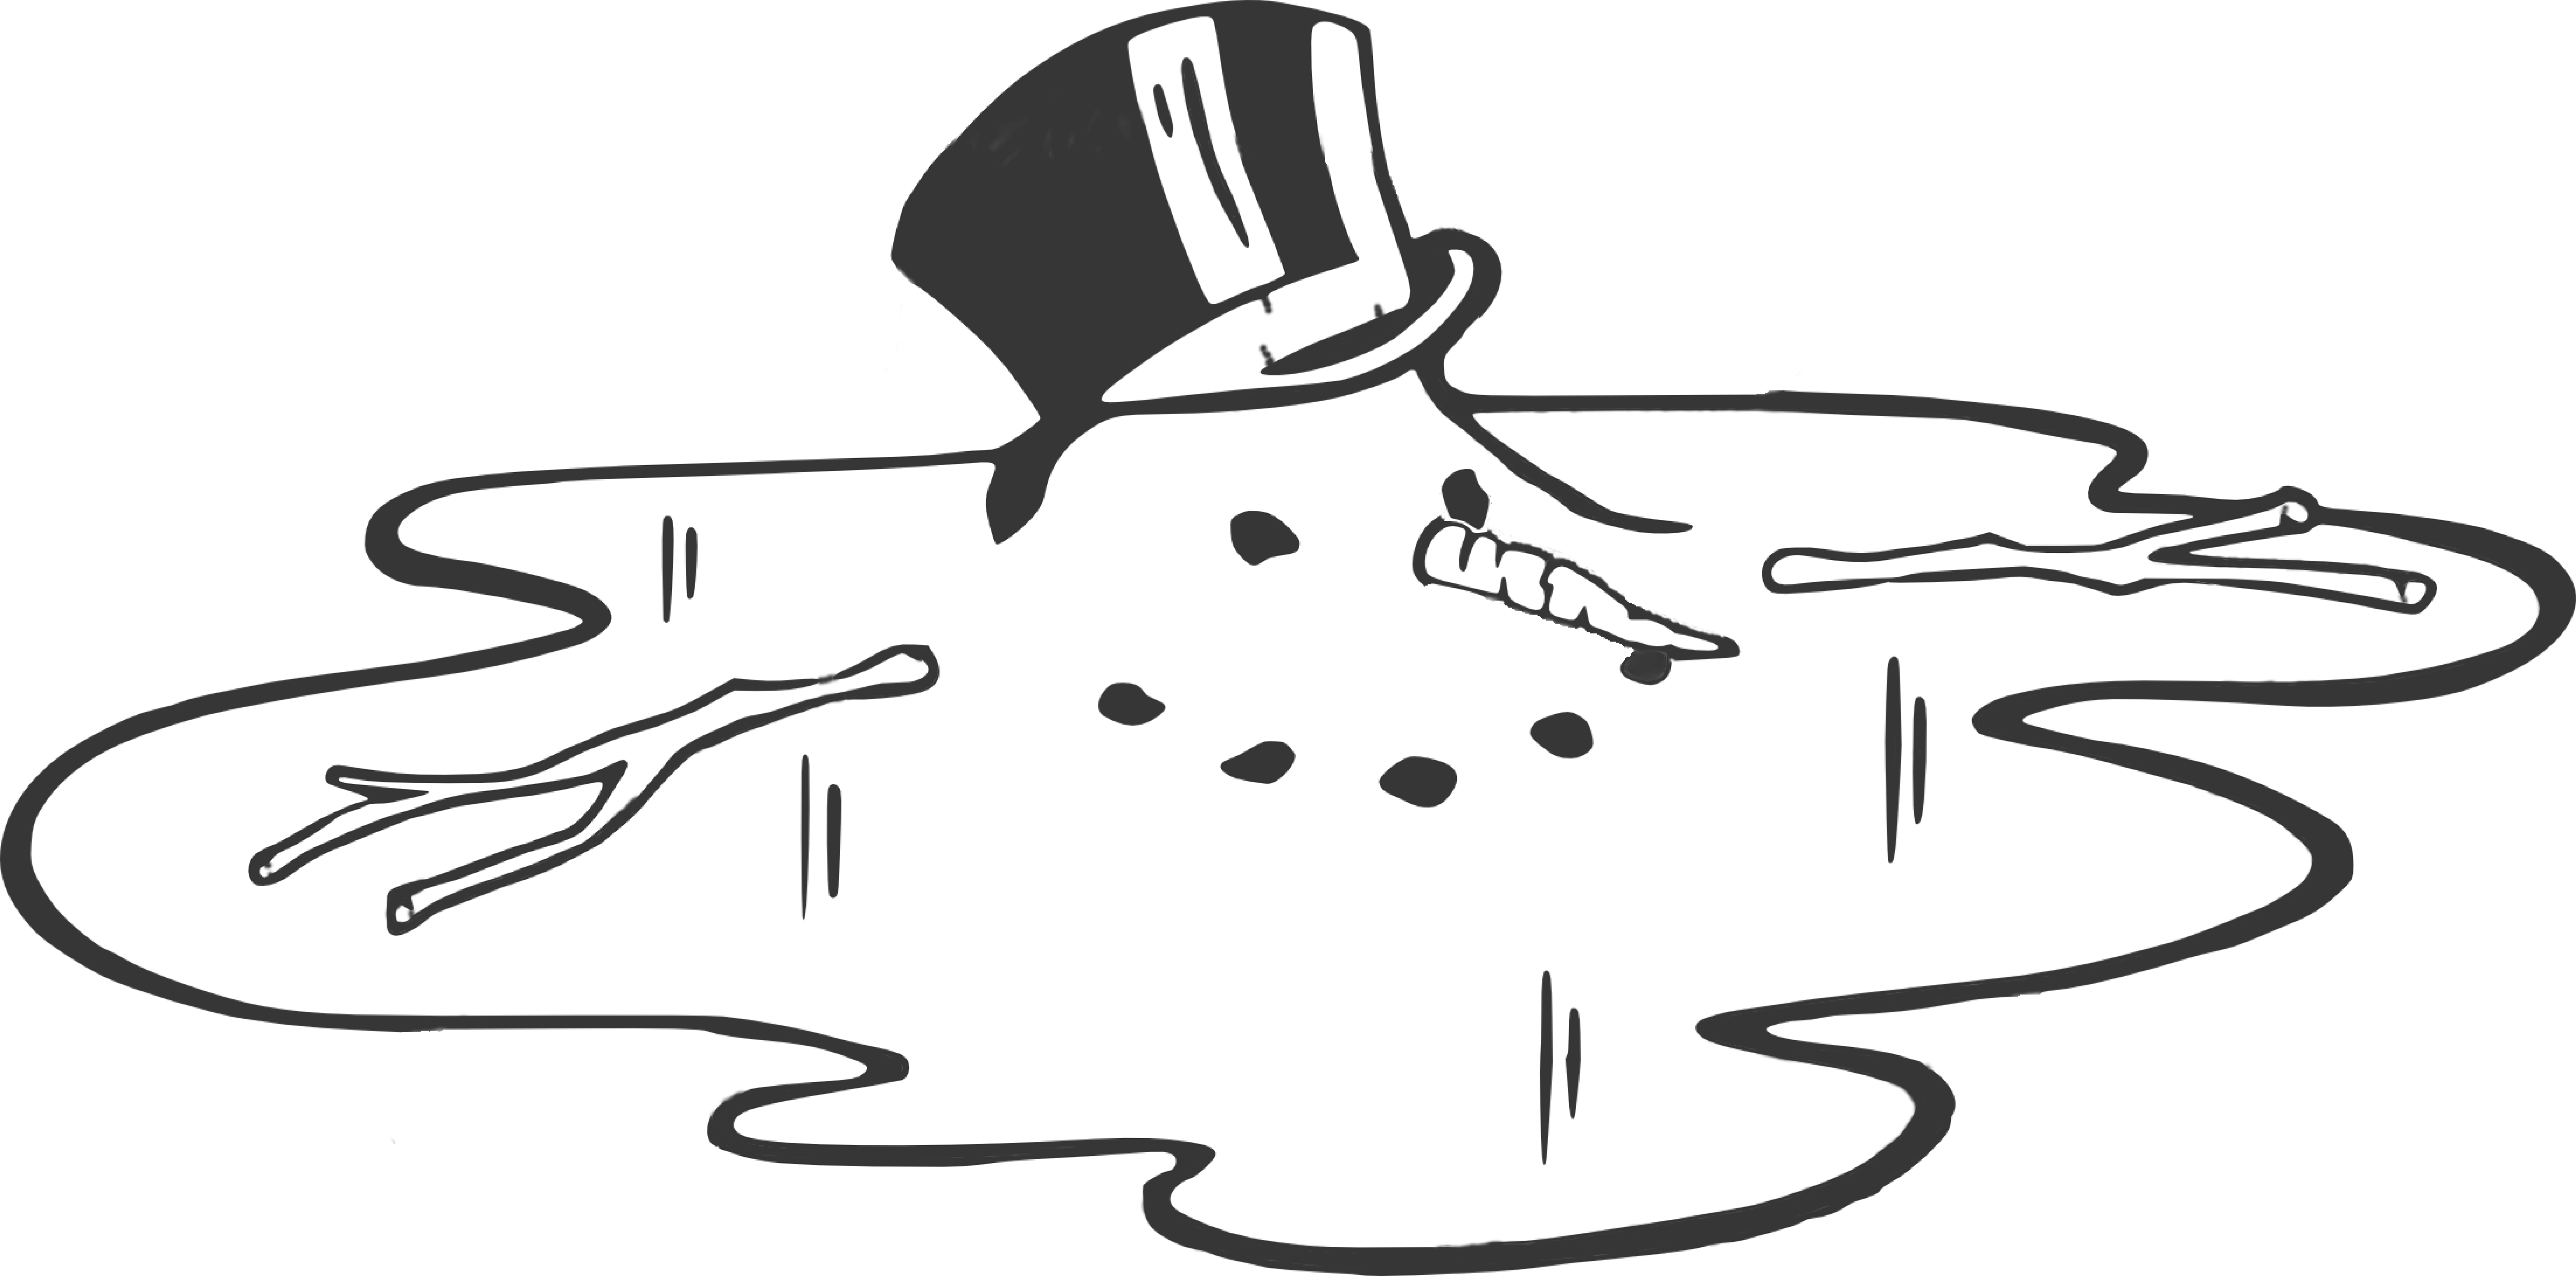 Snowman black and white melting snowman clipart black and white.